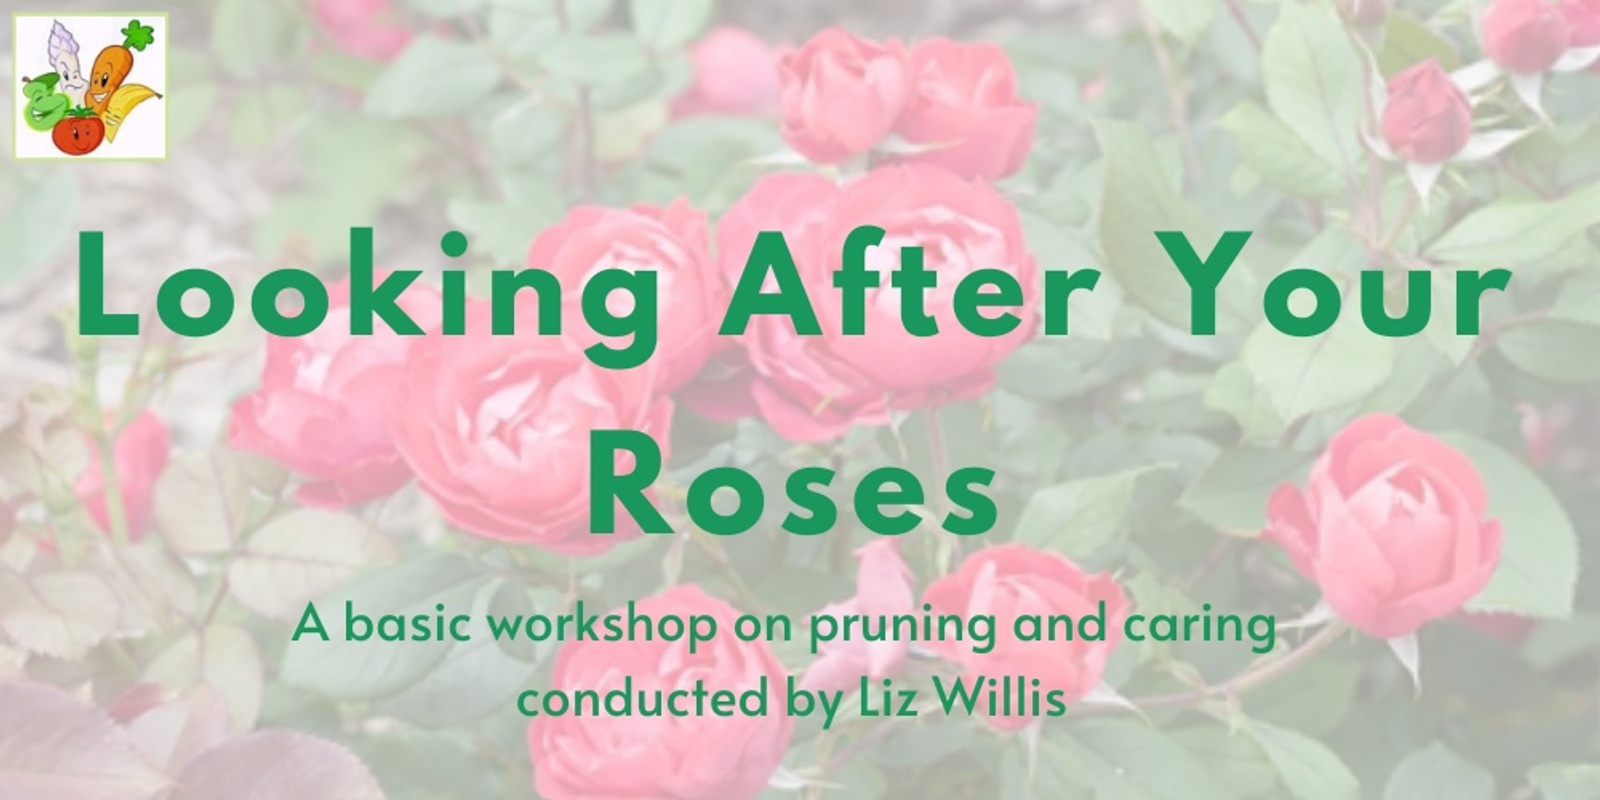  Looking After Your Roses